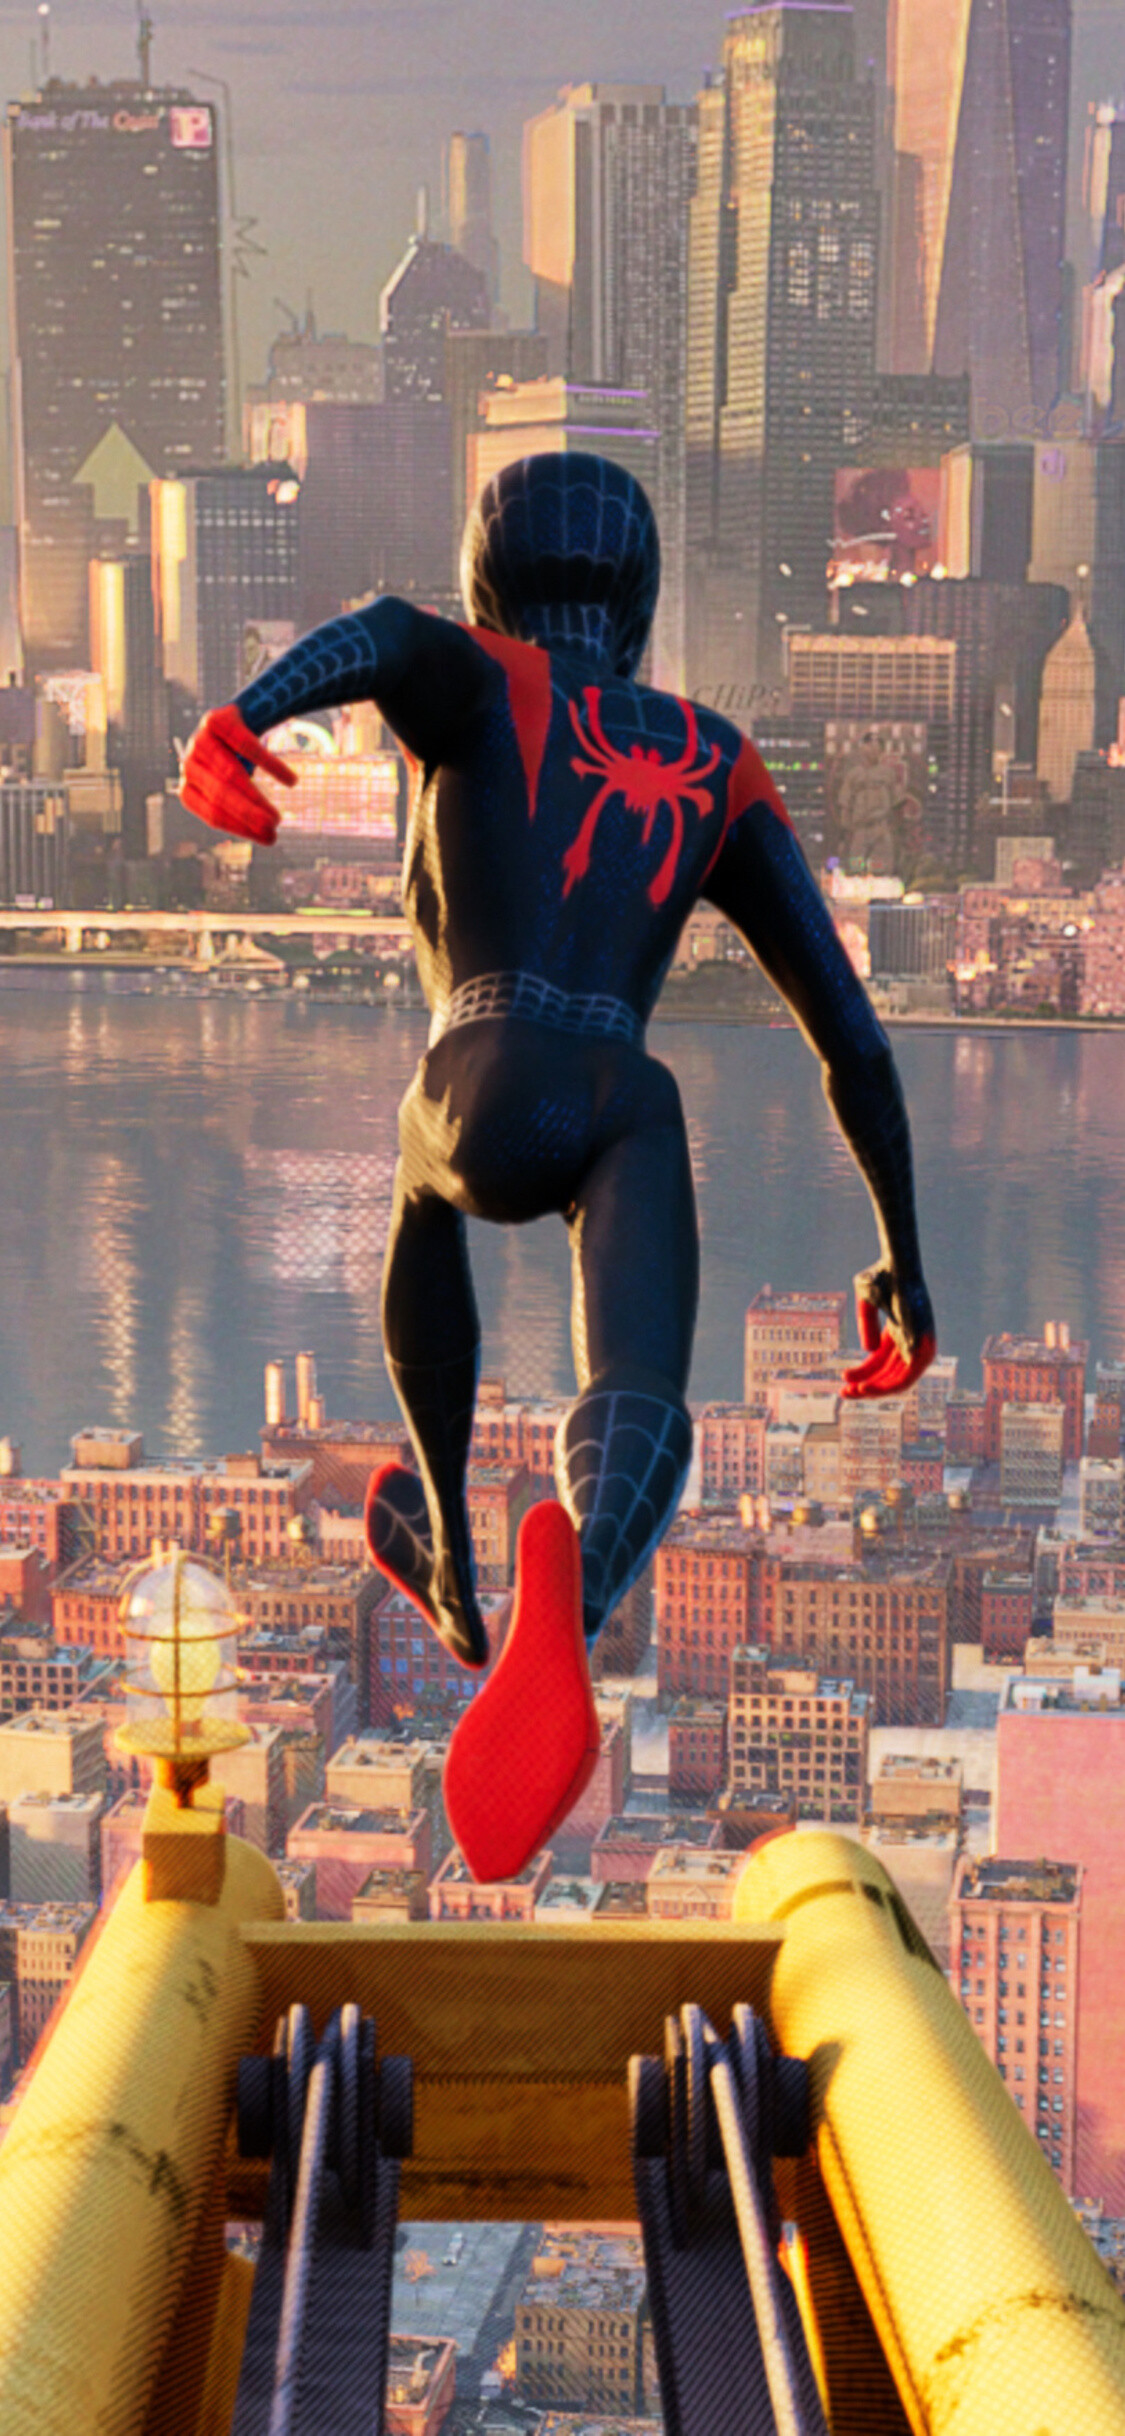 Spider-Man: Into the Spider-Verse: Miles Morales, was Bitten by a "Genetically Modified" Spider Created by Alchemax. 1130x2440 HD Wallpaper.